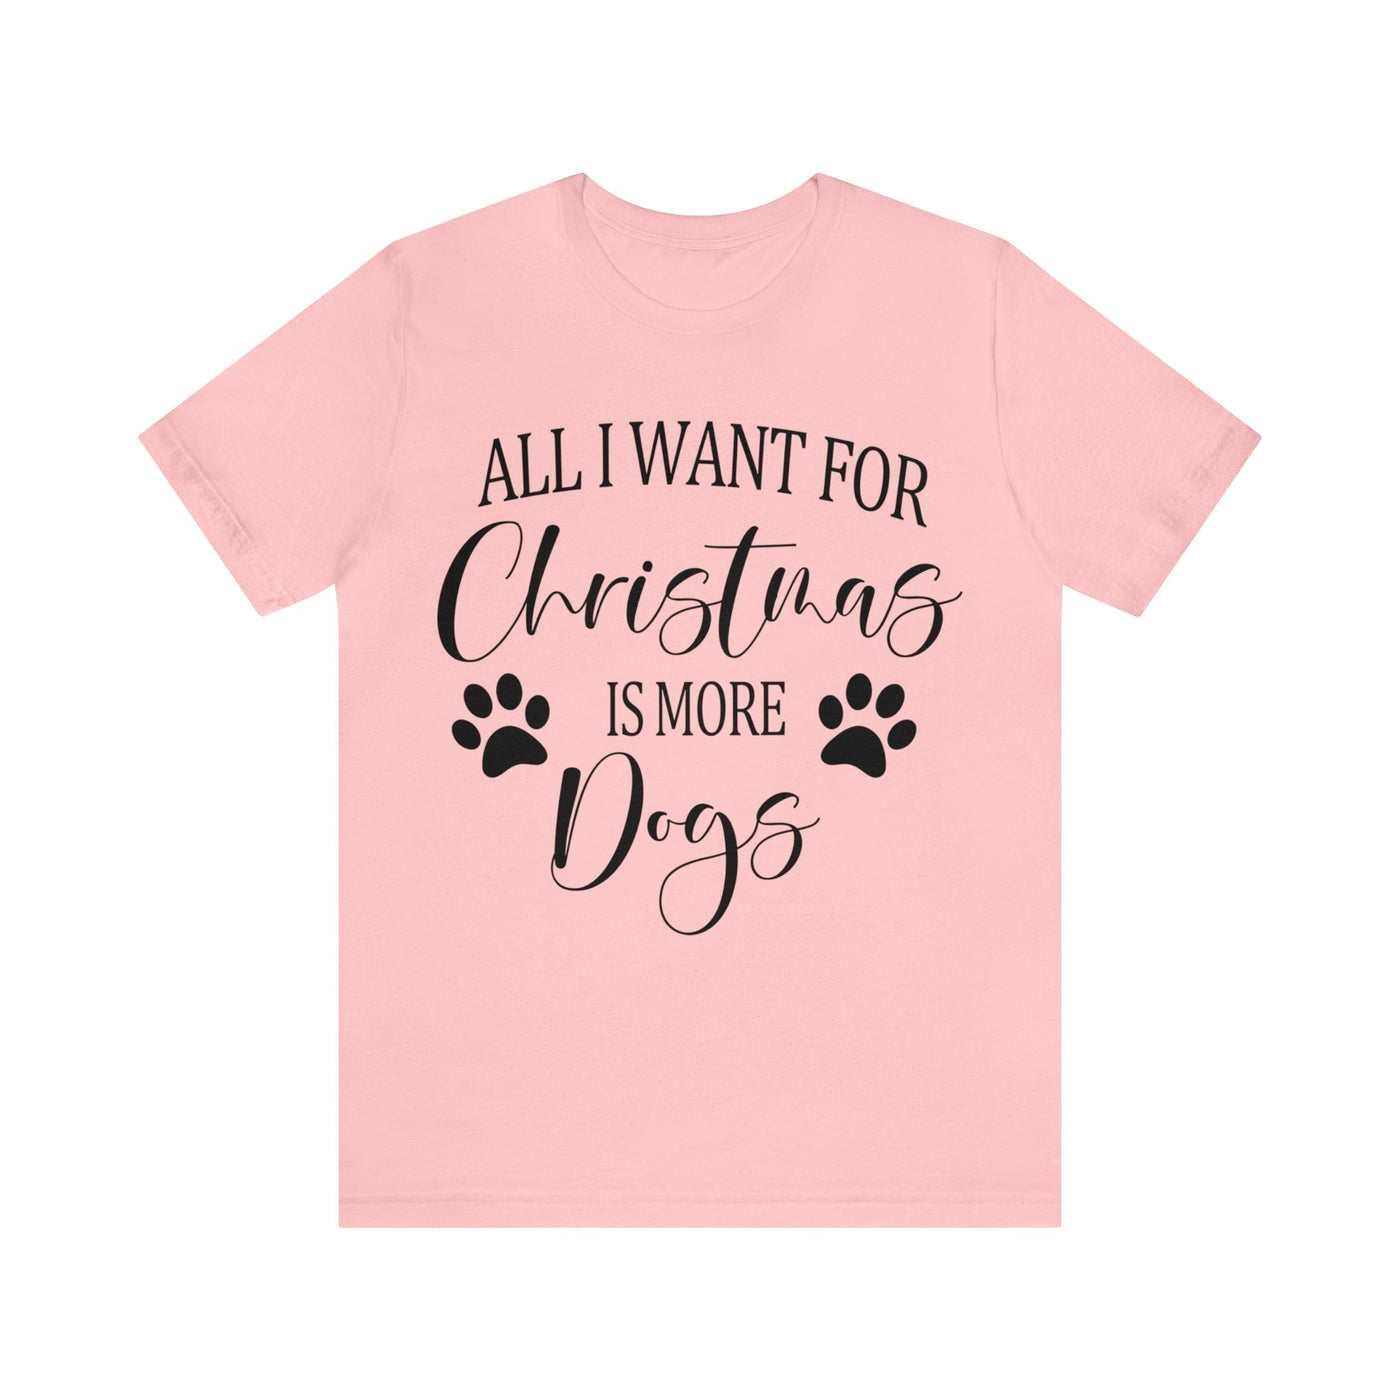 All I Want for Christmas Is More Dogs Black Print T-Shirt